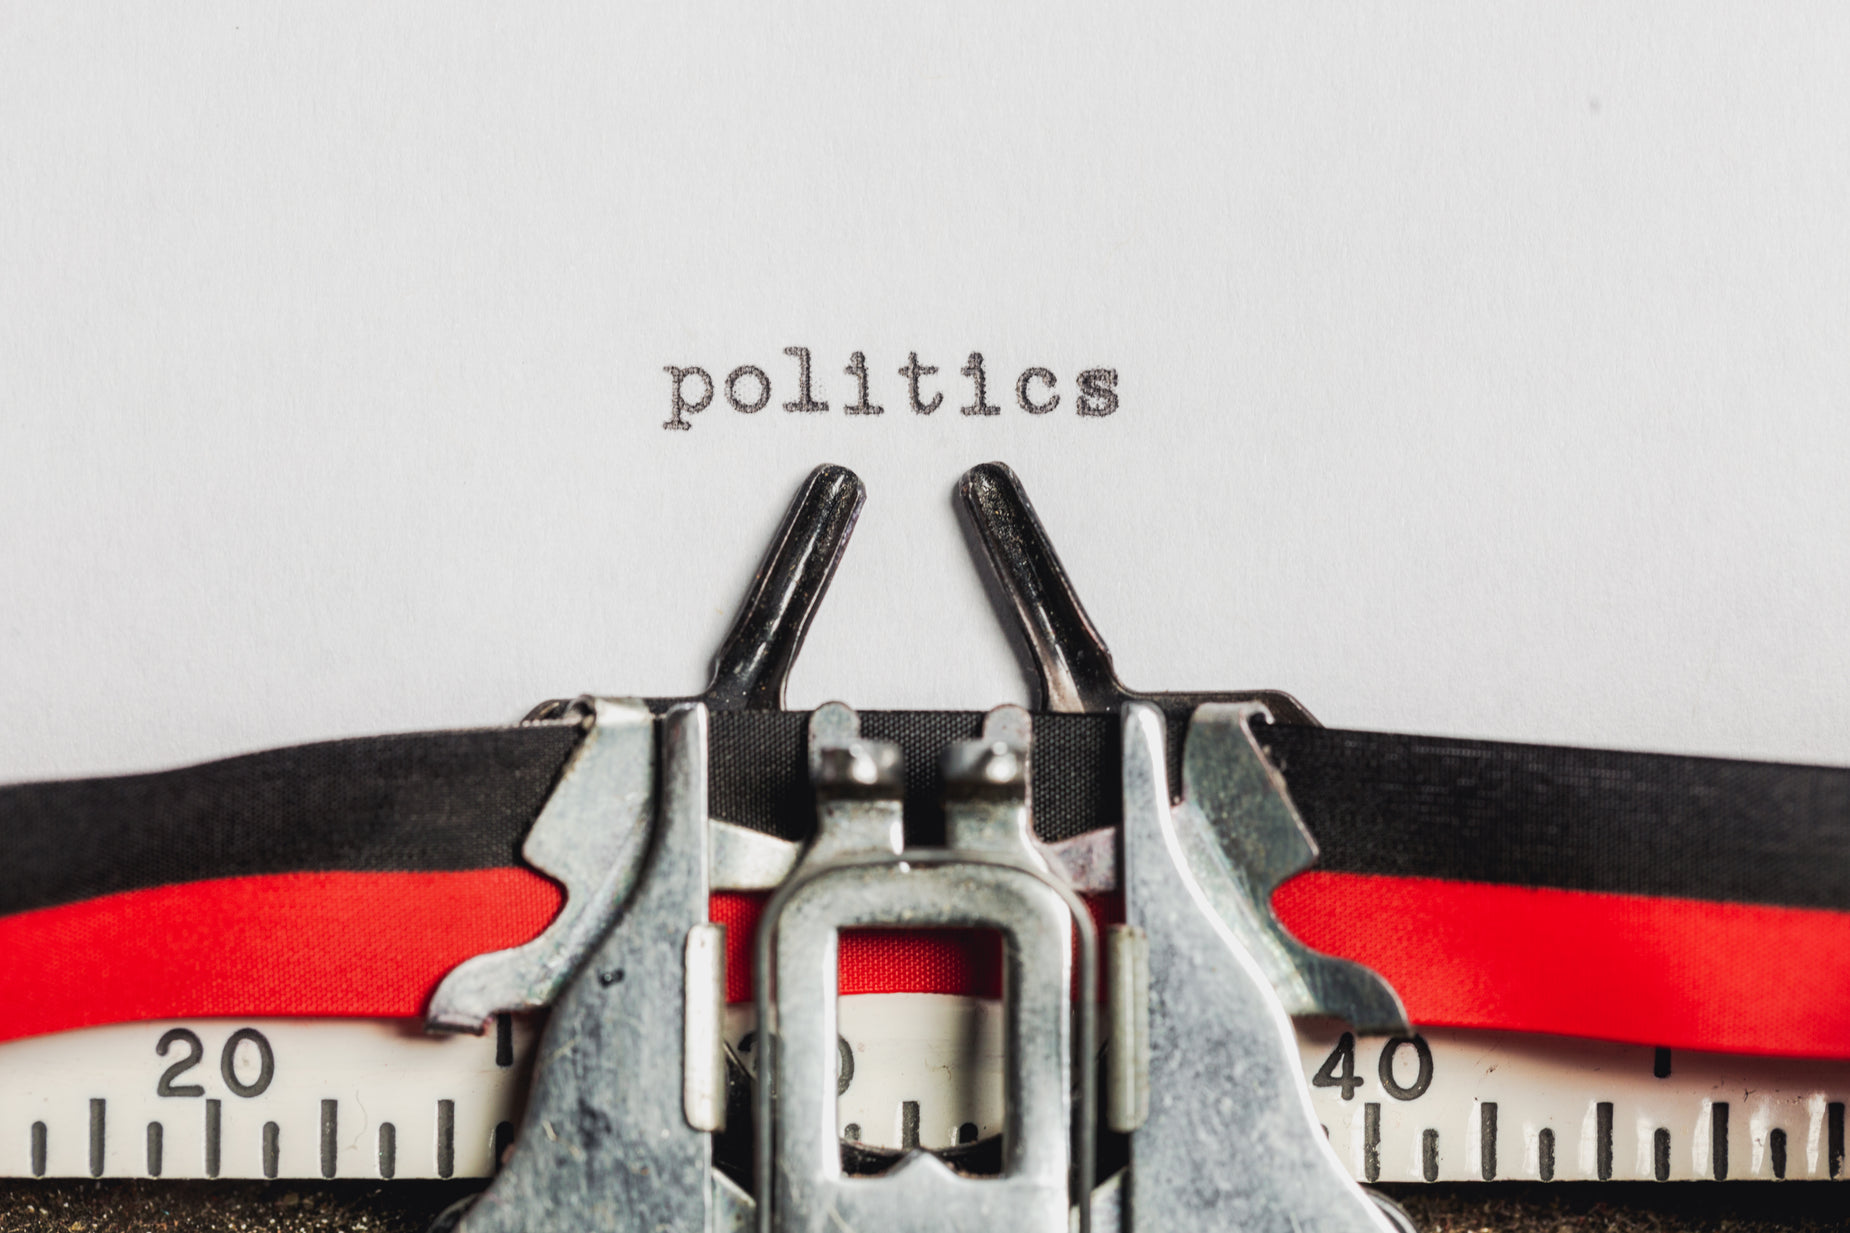 two scissors are next to a typewriter that says politics